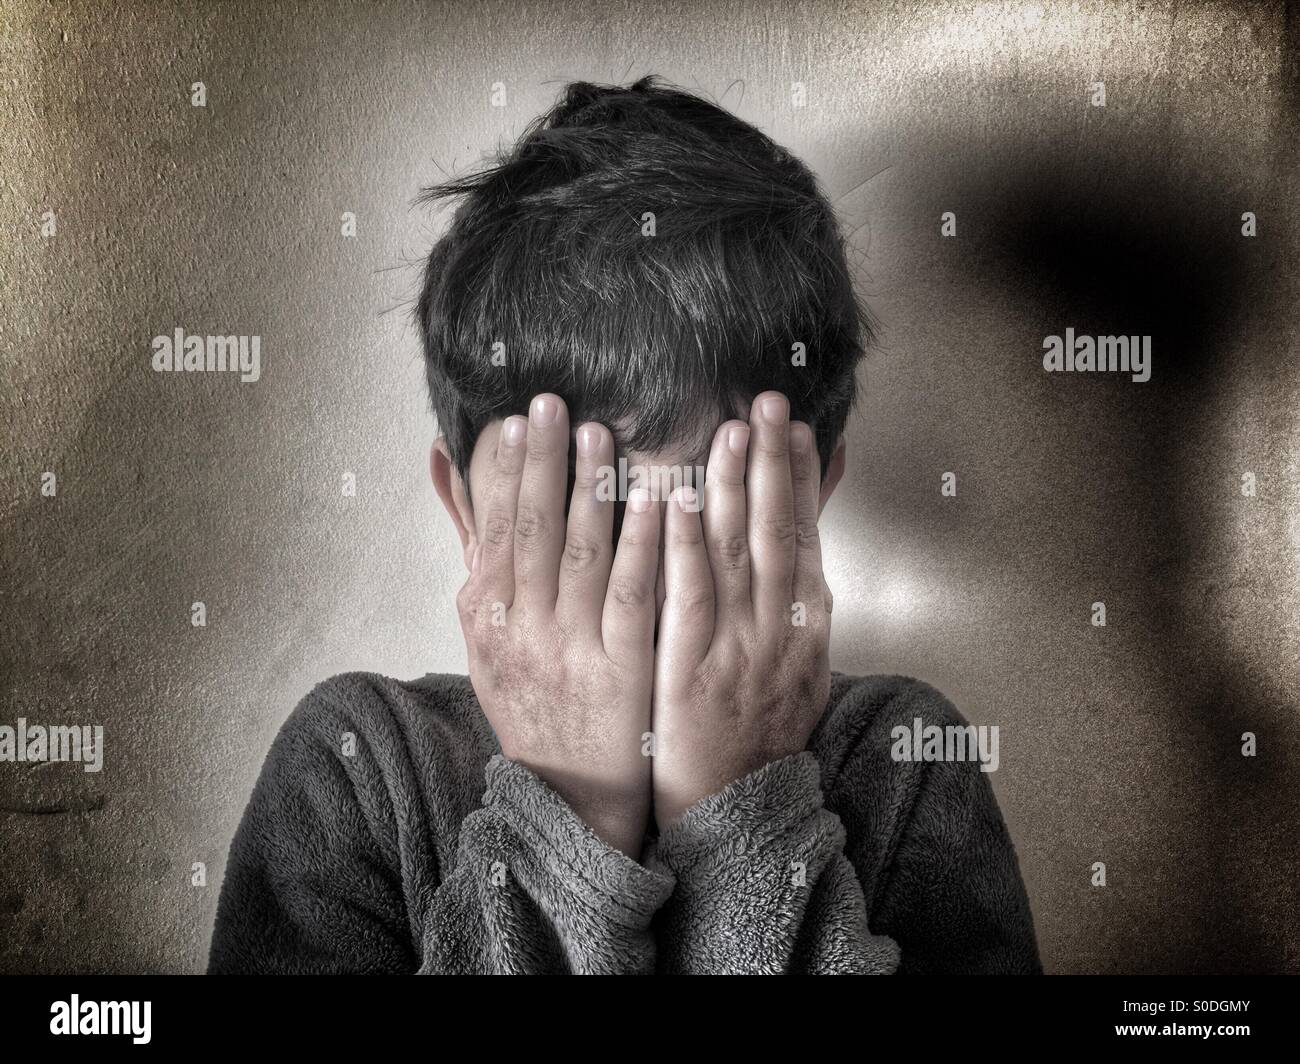 Boy hiding face with hands Stock Photo